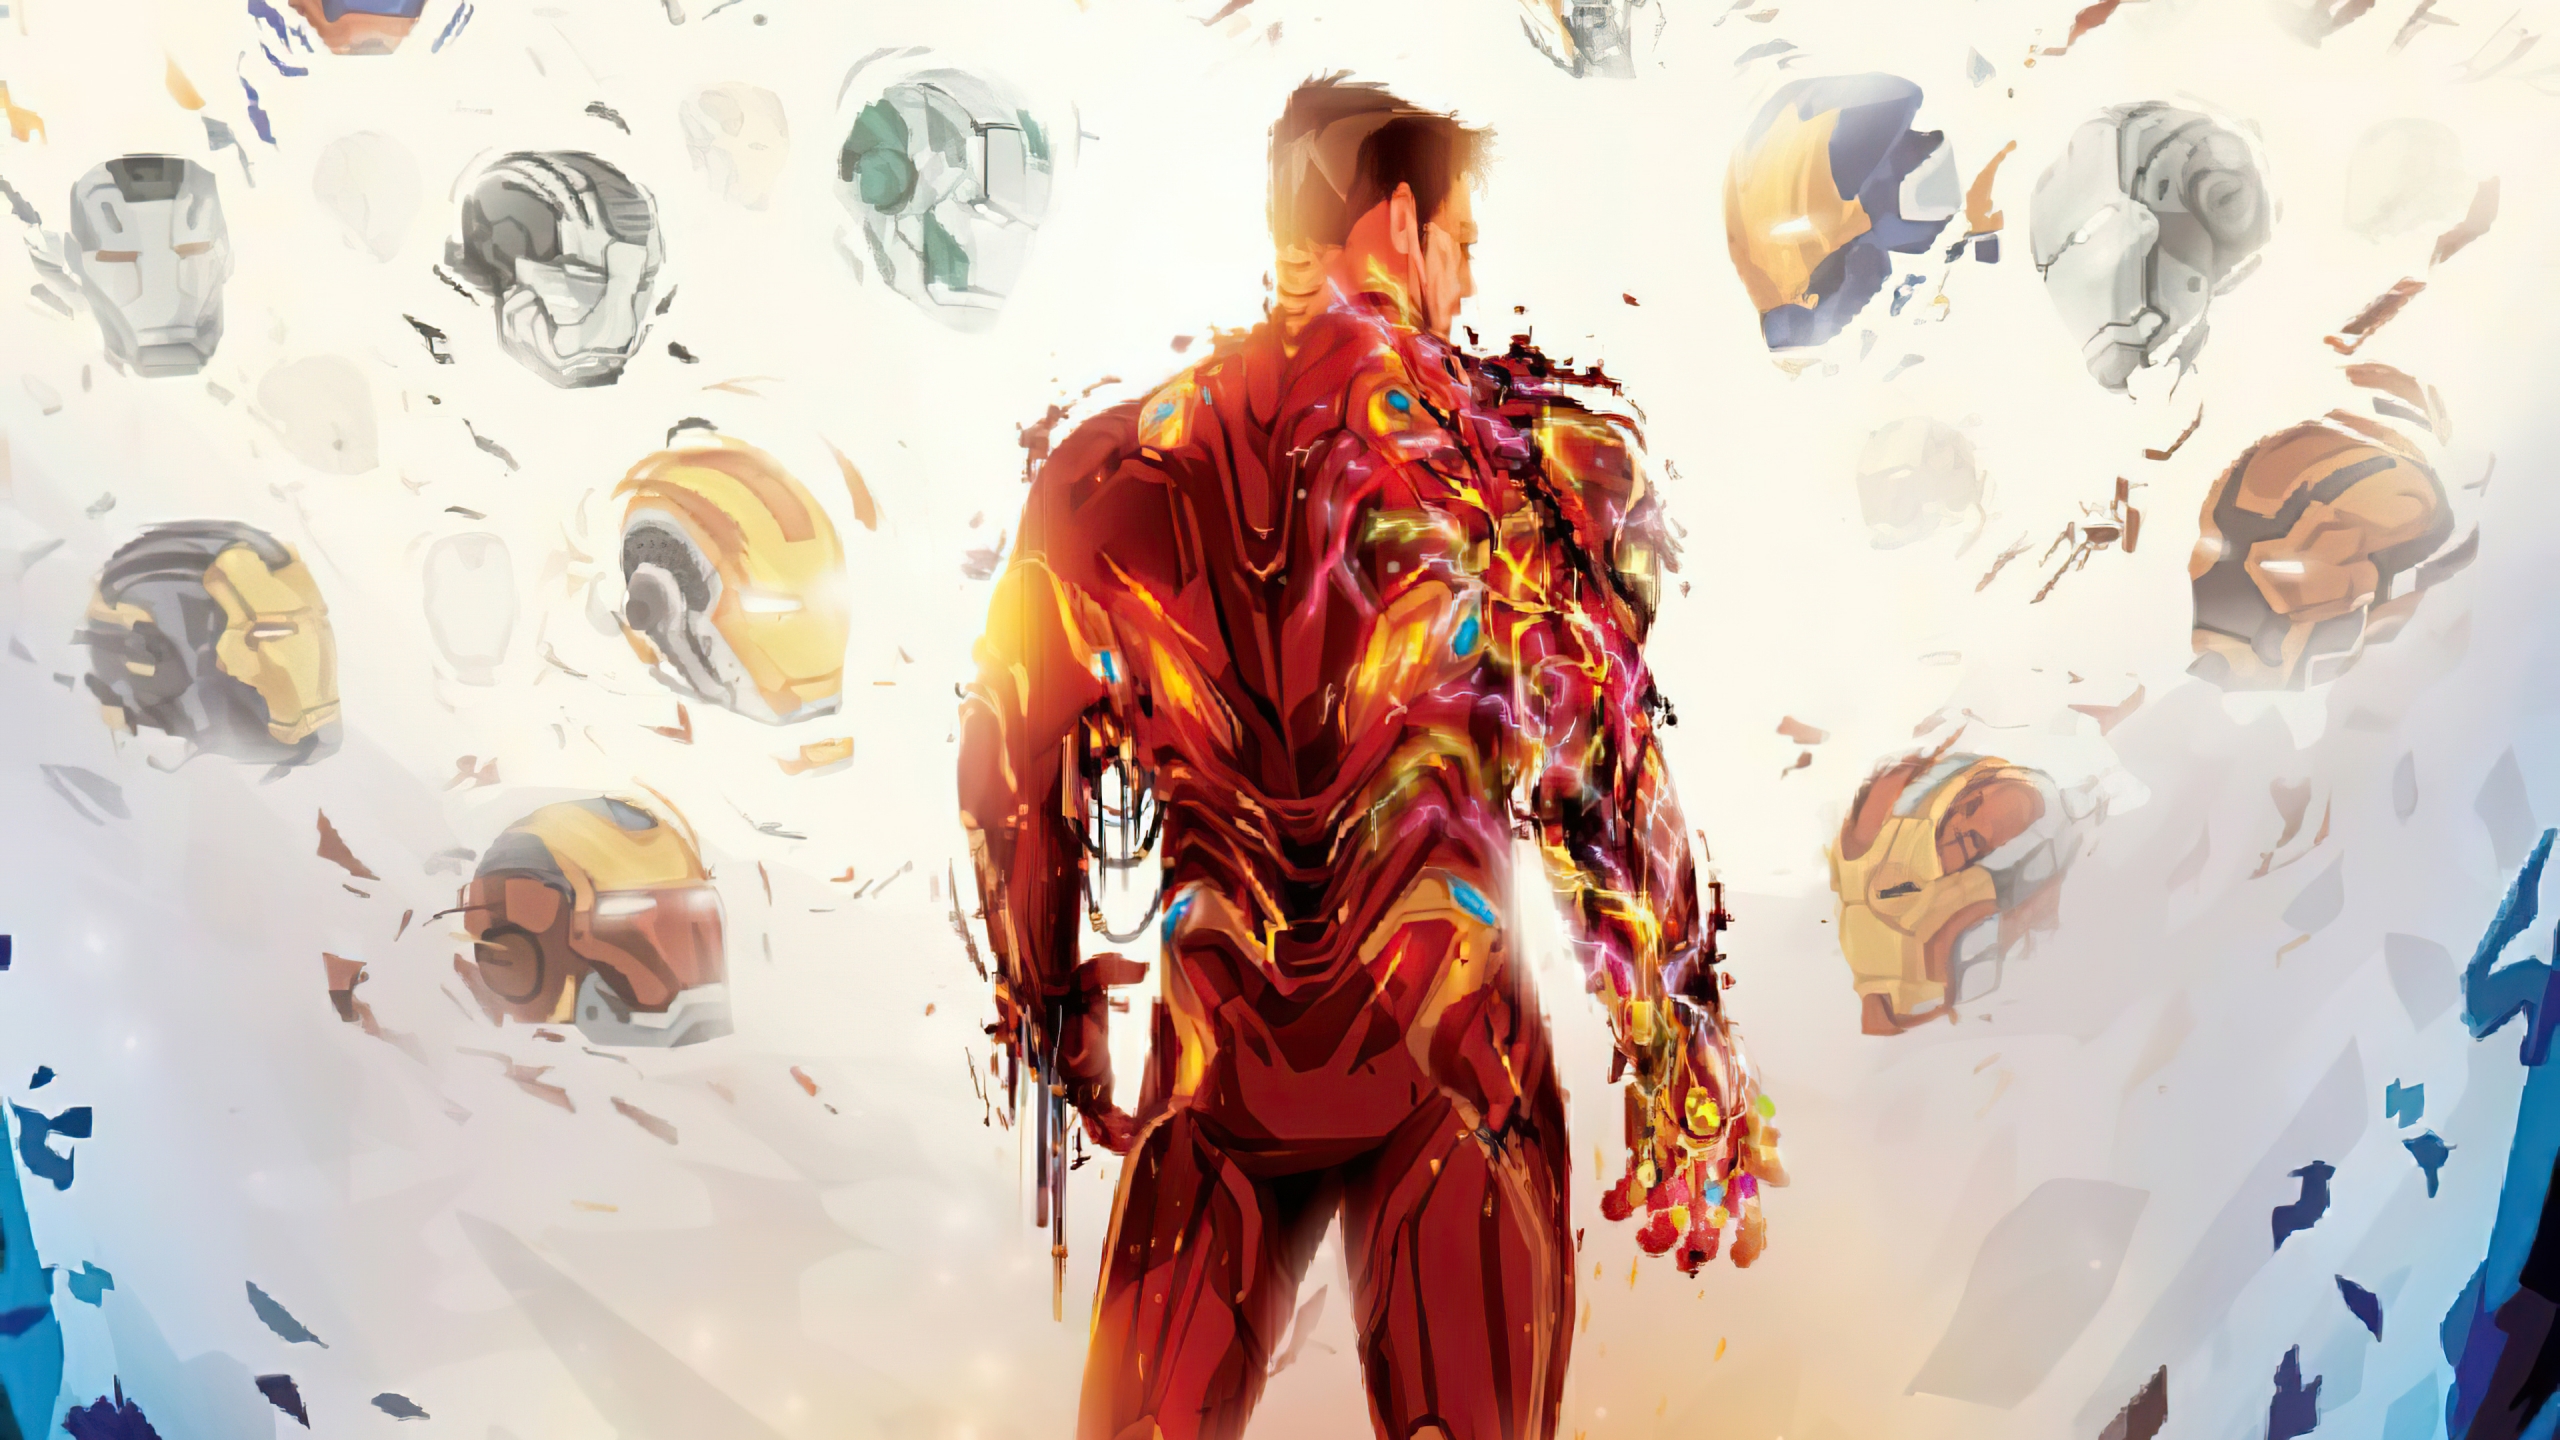 Iron man from the back Wallpaper 4k Ultra HD ID:6084